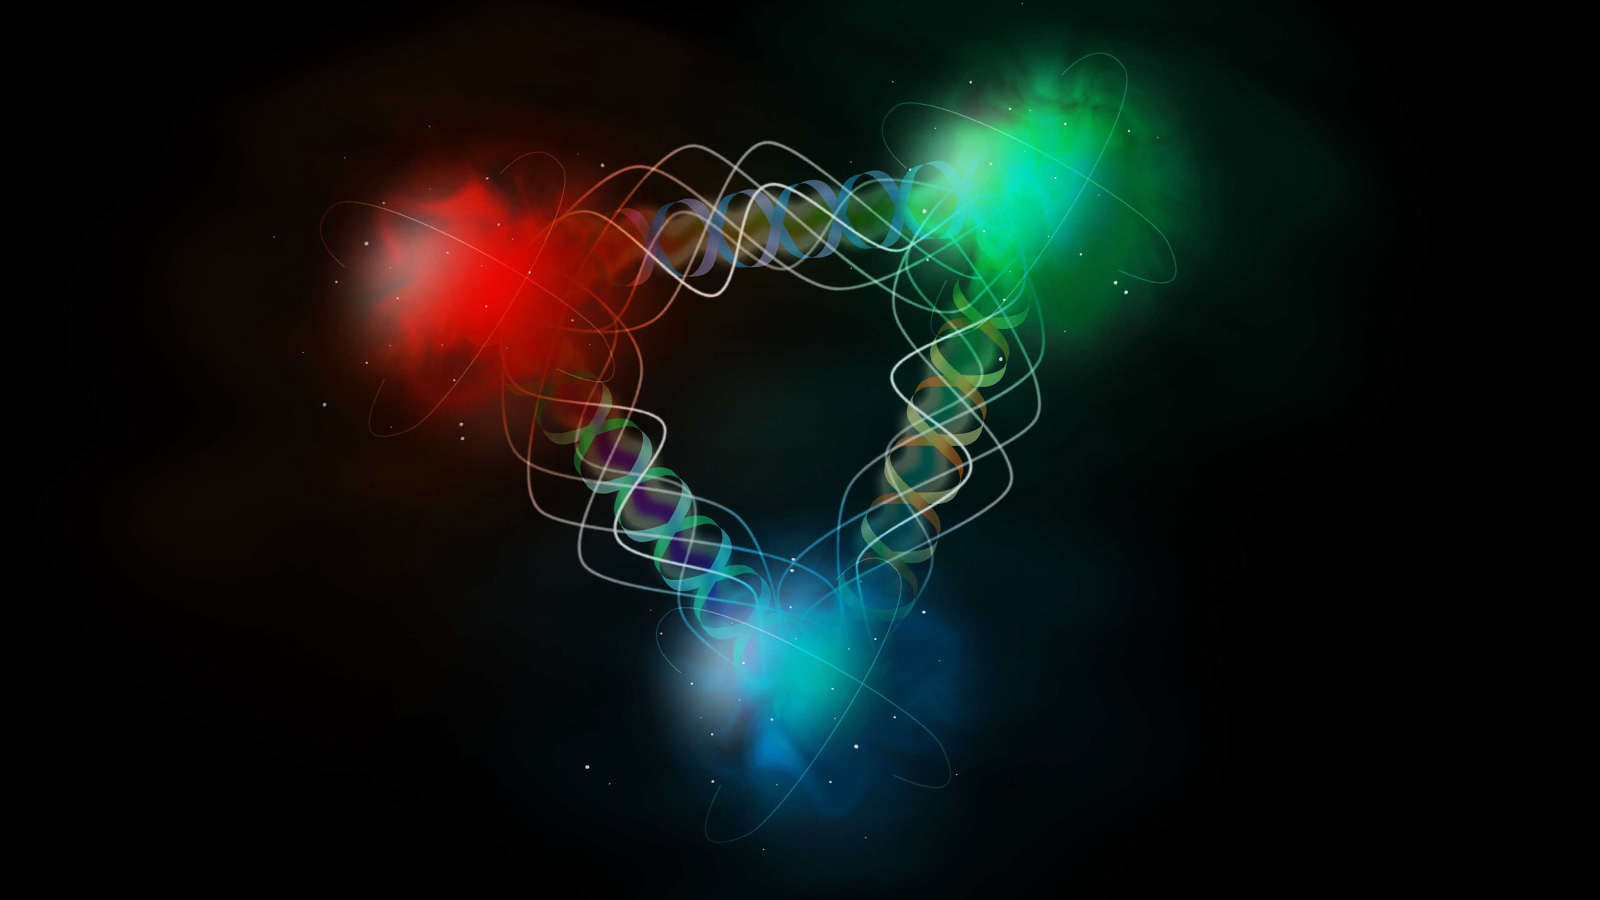 Argonne is working with other DOE national laboratories on the planned Electron Ion Collider, which will probe how subatomic quarks (shown here in red, blue and green) interact through the exchange of gluons (shown as wiggly helices). (Image courtesy of Shutterstock.)